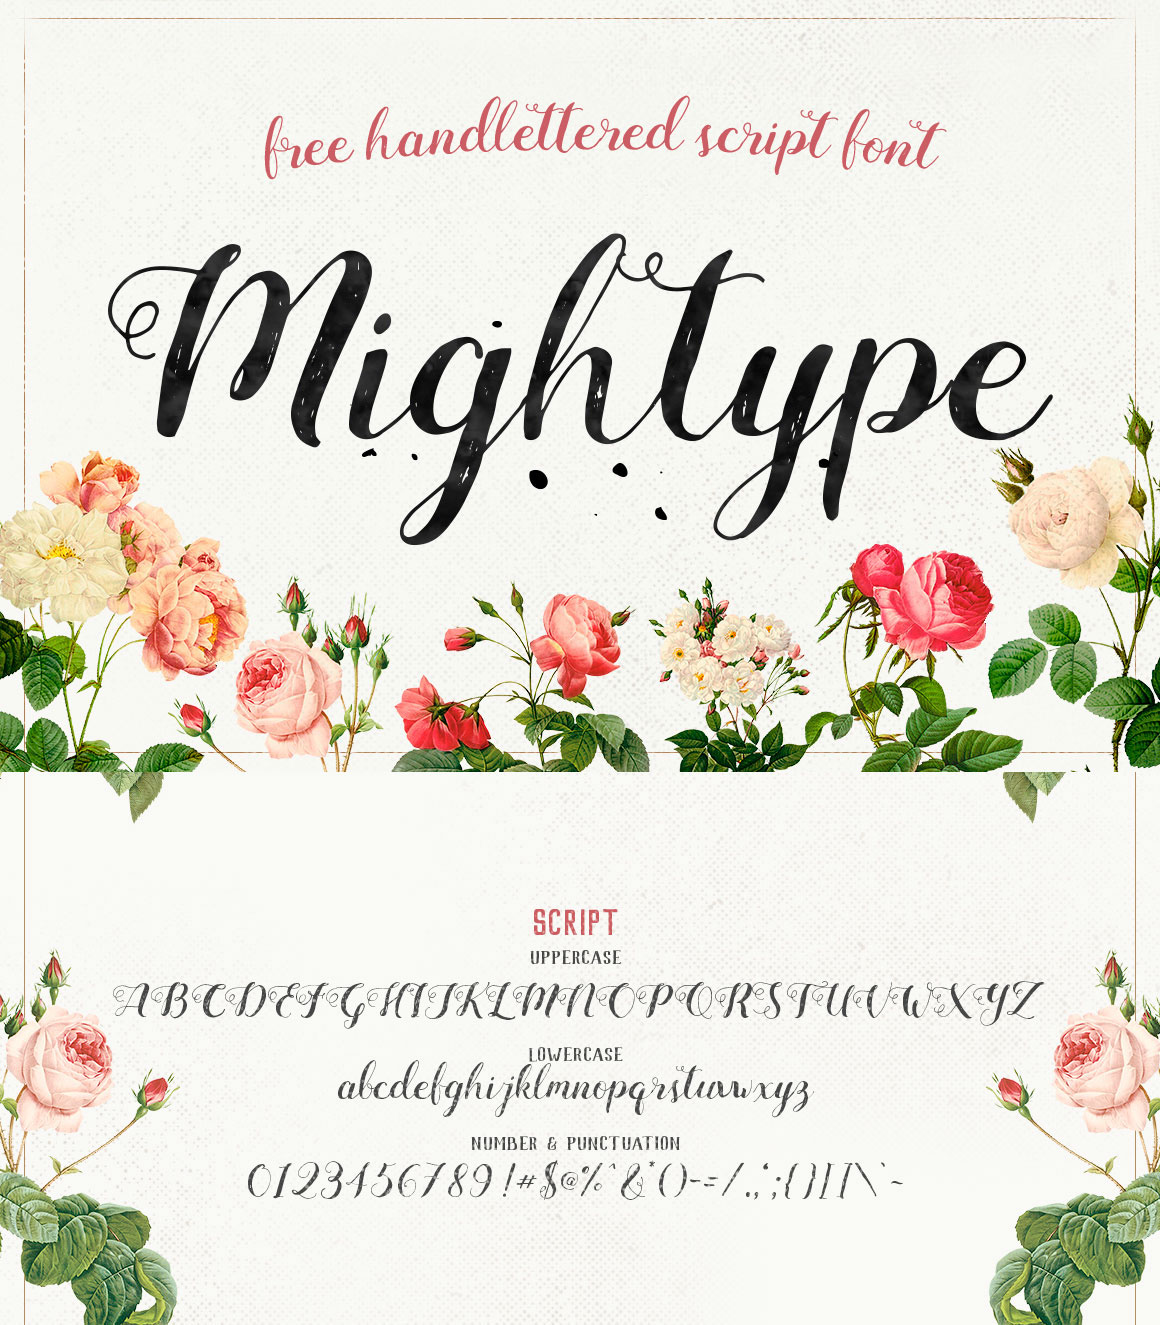 mightype-script-free-handlettered-font